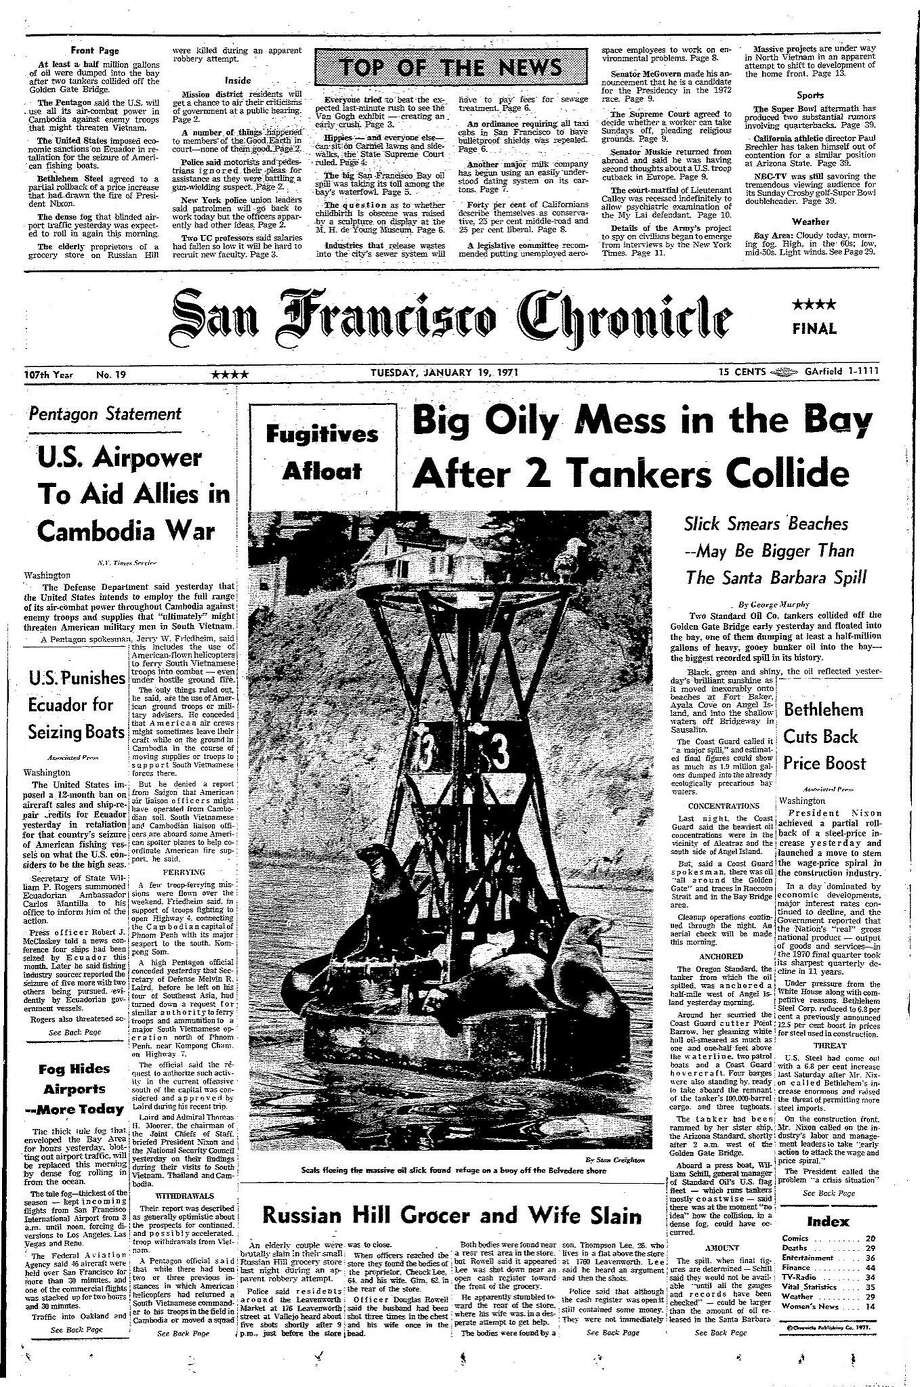 Chronicle Covers: San Francisco Bay's oil spill for the ages